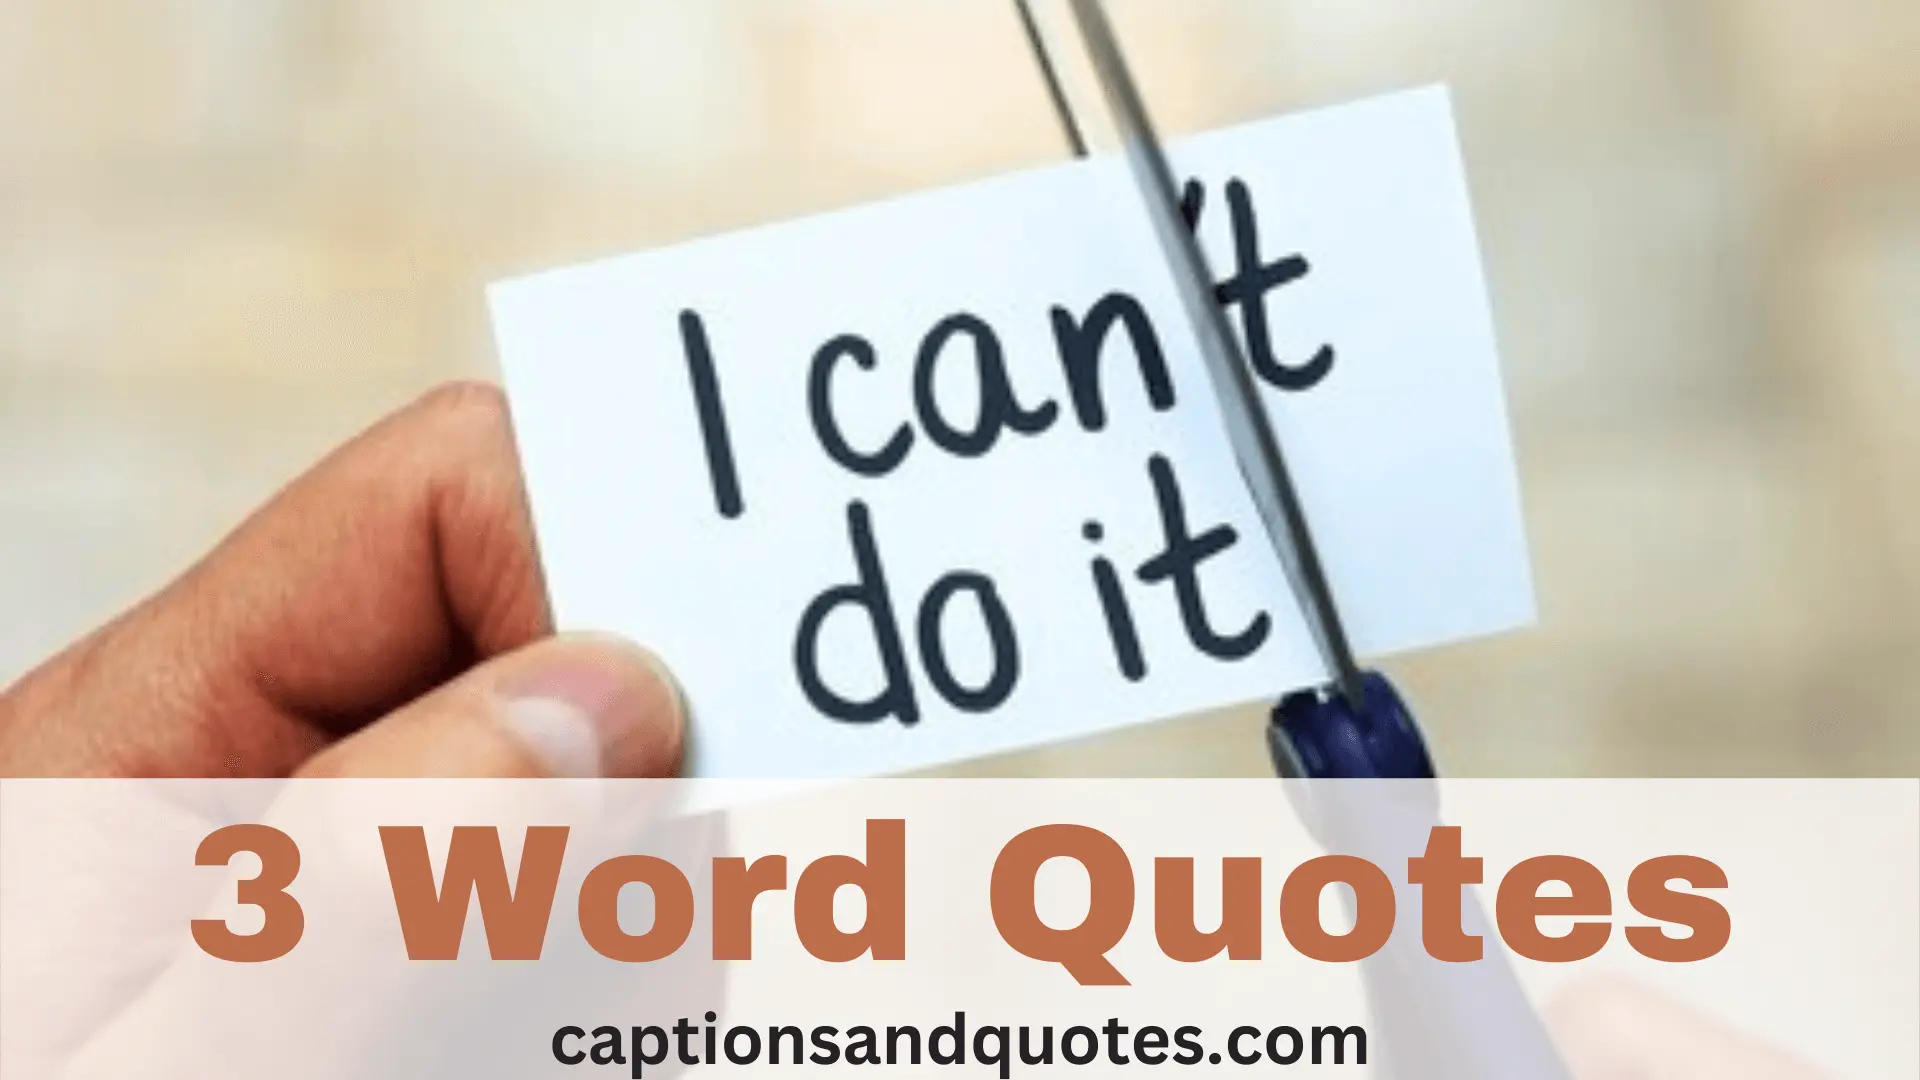 3 word quotes